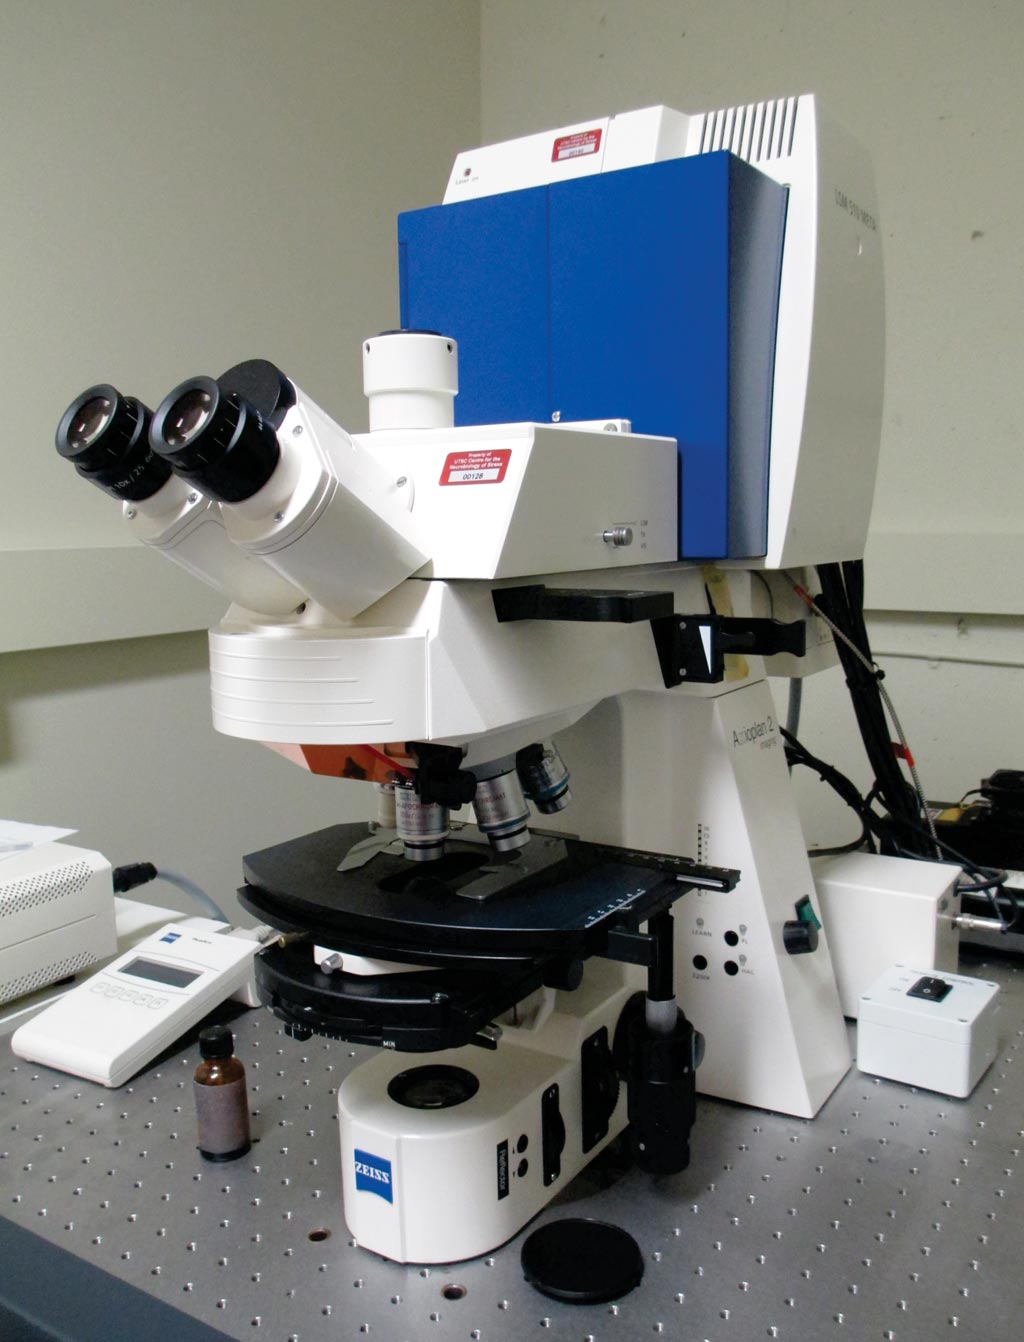 Image: The LSM510 META confocal microscope (Photo courtesy of Zeiss).